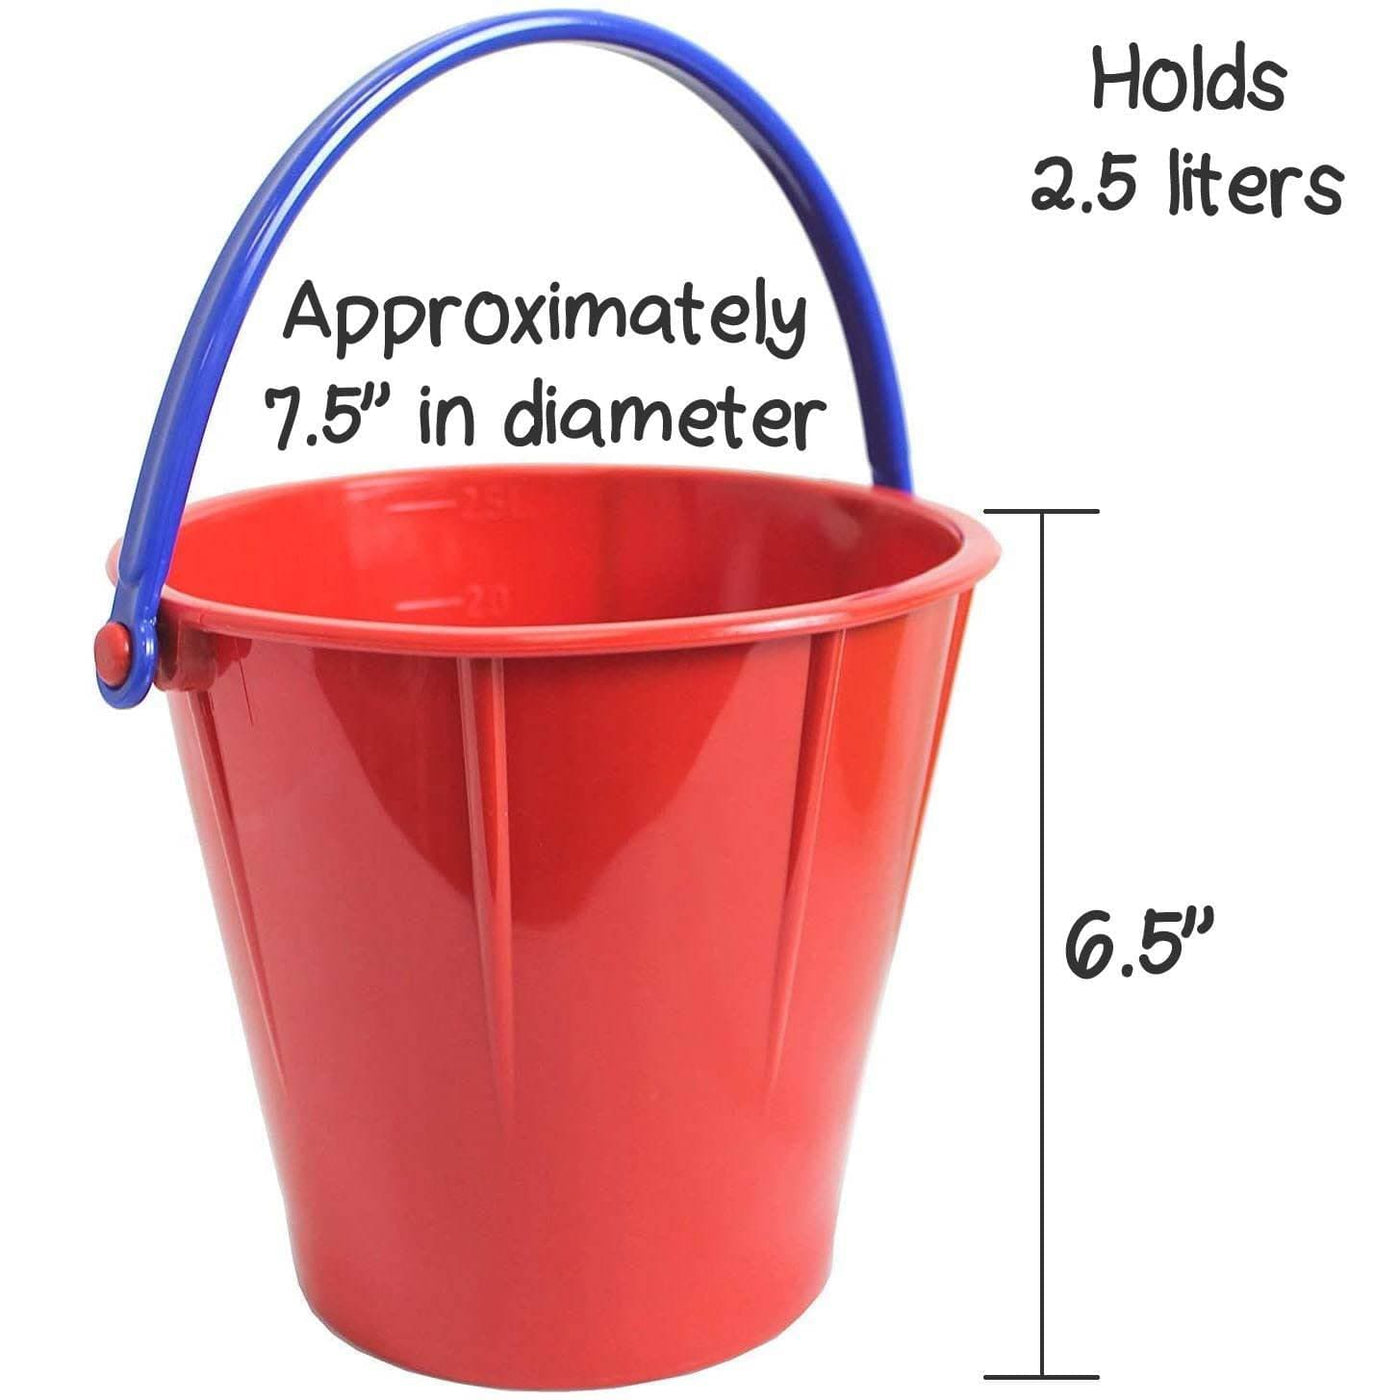 2.5 Liter Pail for Sand & Snow (assorted colors) - HABA USA